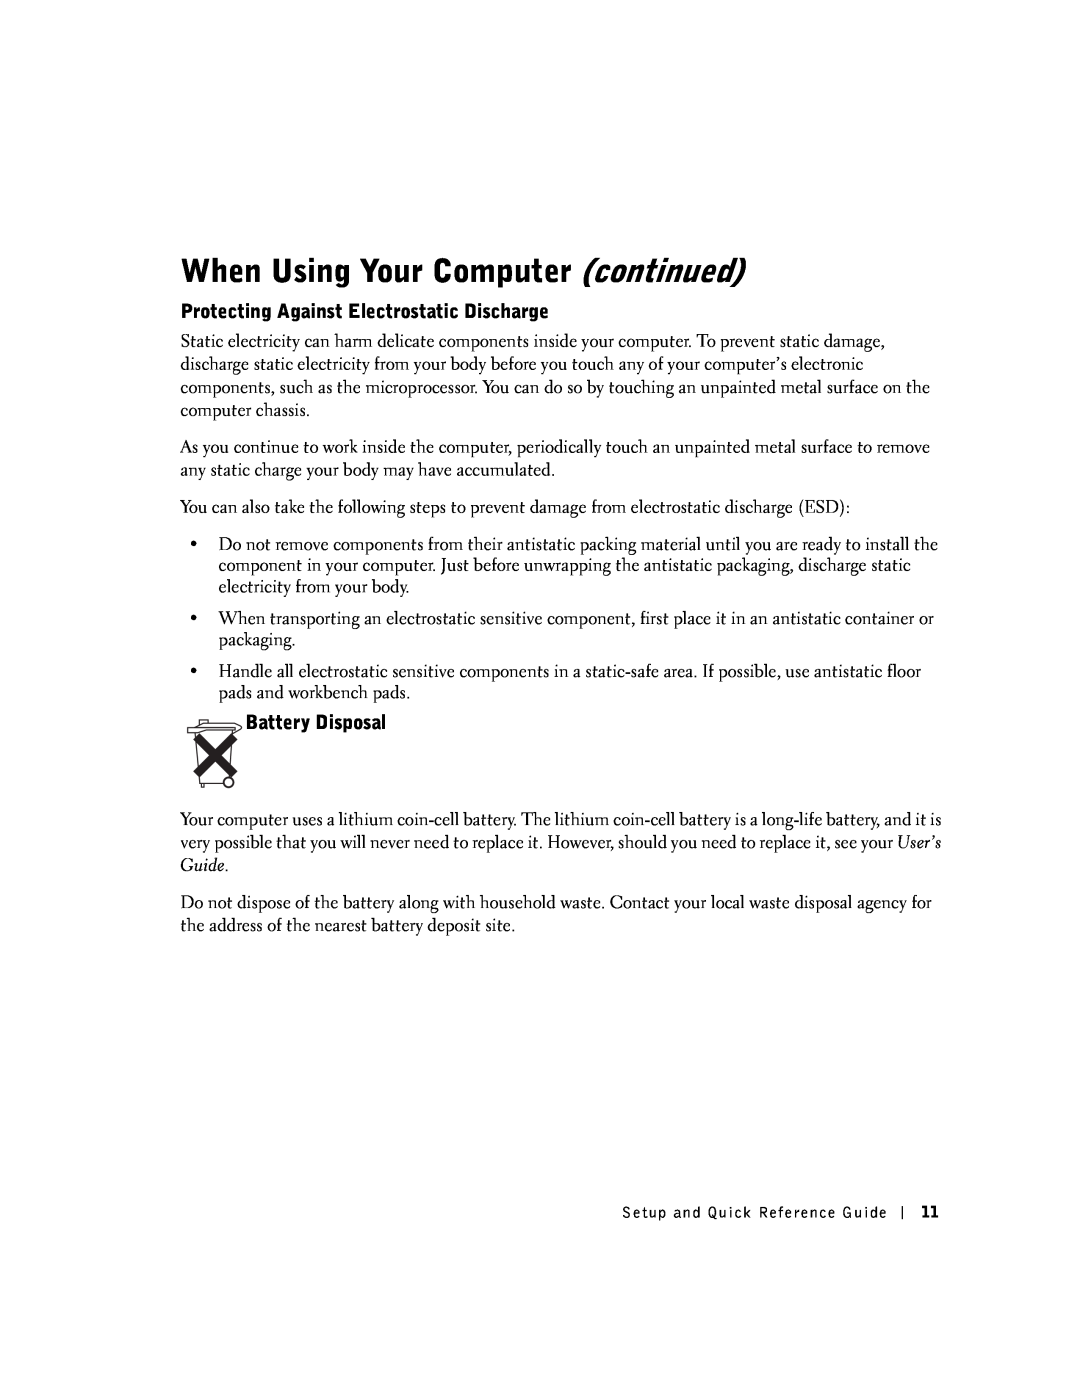 Dell SX manual Protecting Against Electrostatic Discharge, Battery Disposal, When Using Your Computer continued 